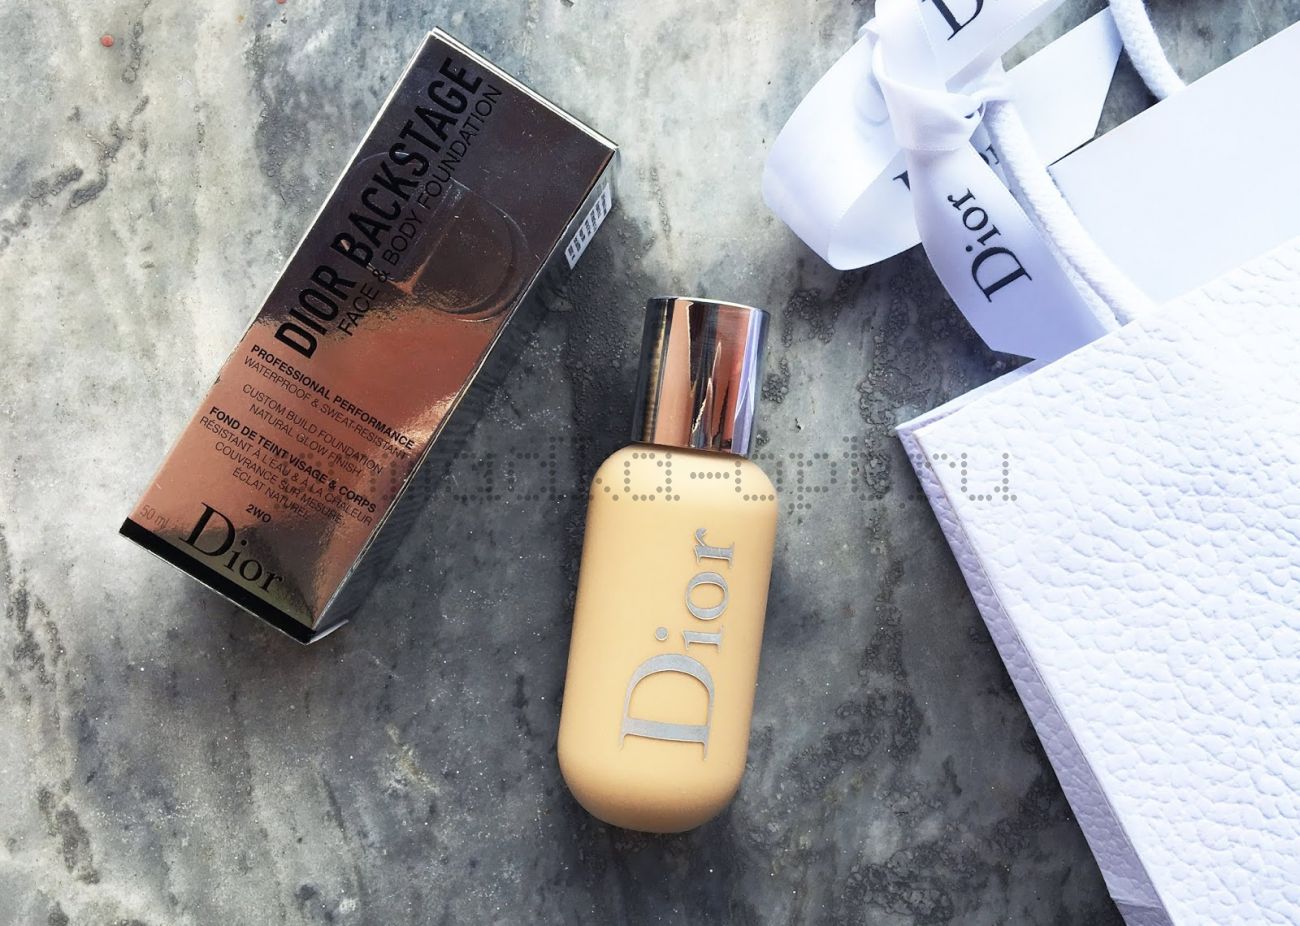 Dior тон 1С Backstage Face and Body Foundation in 2W